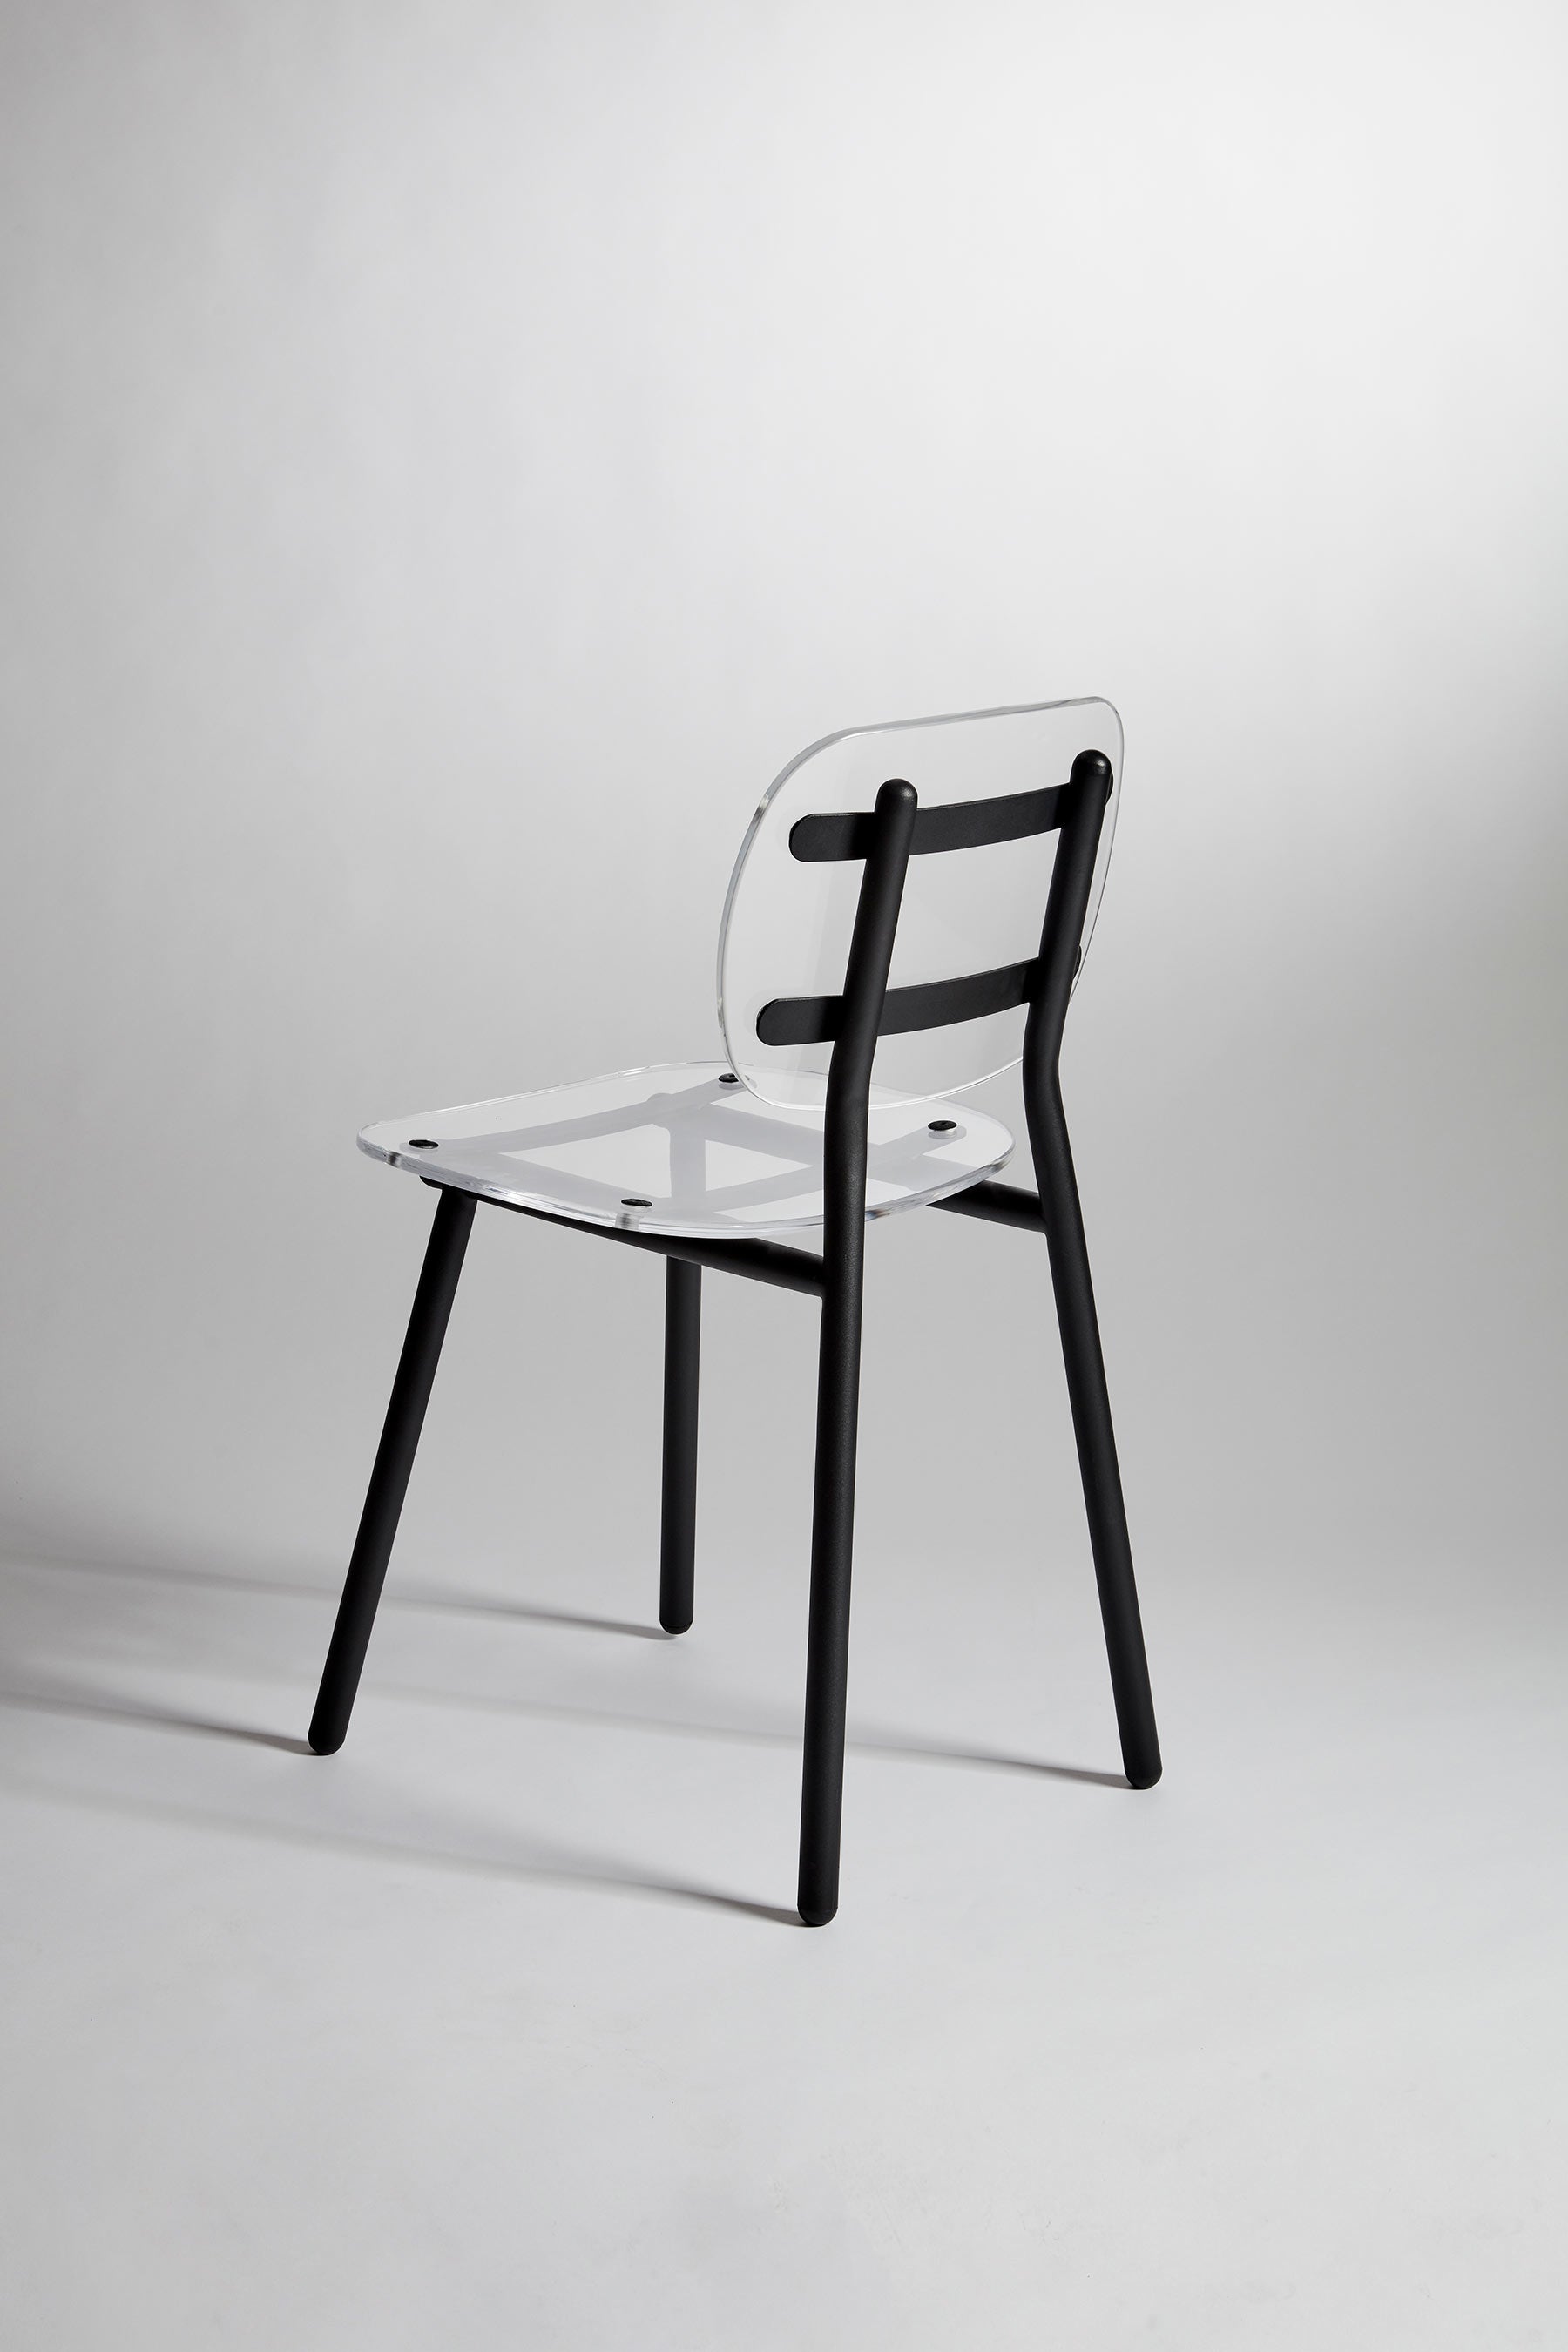 Fenster Dining Chair | Clear Acrylic & Black Stainless Steel Indoor Outdoor Seating | GibsonKarlo | DesignByThem